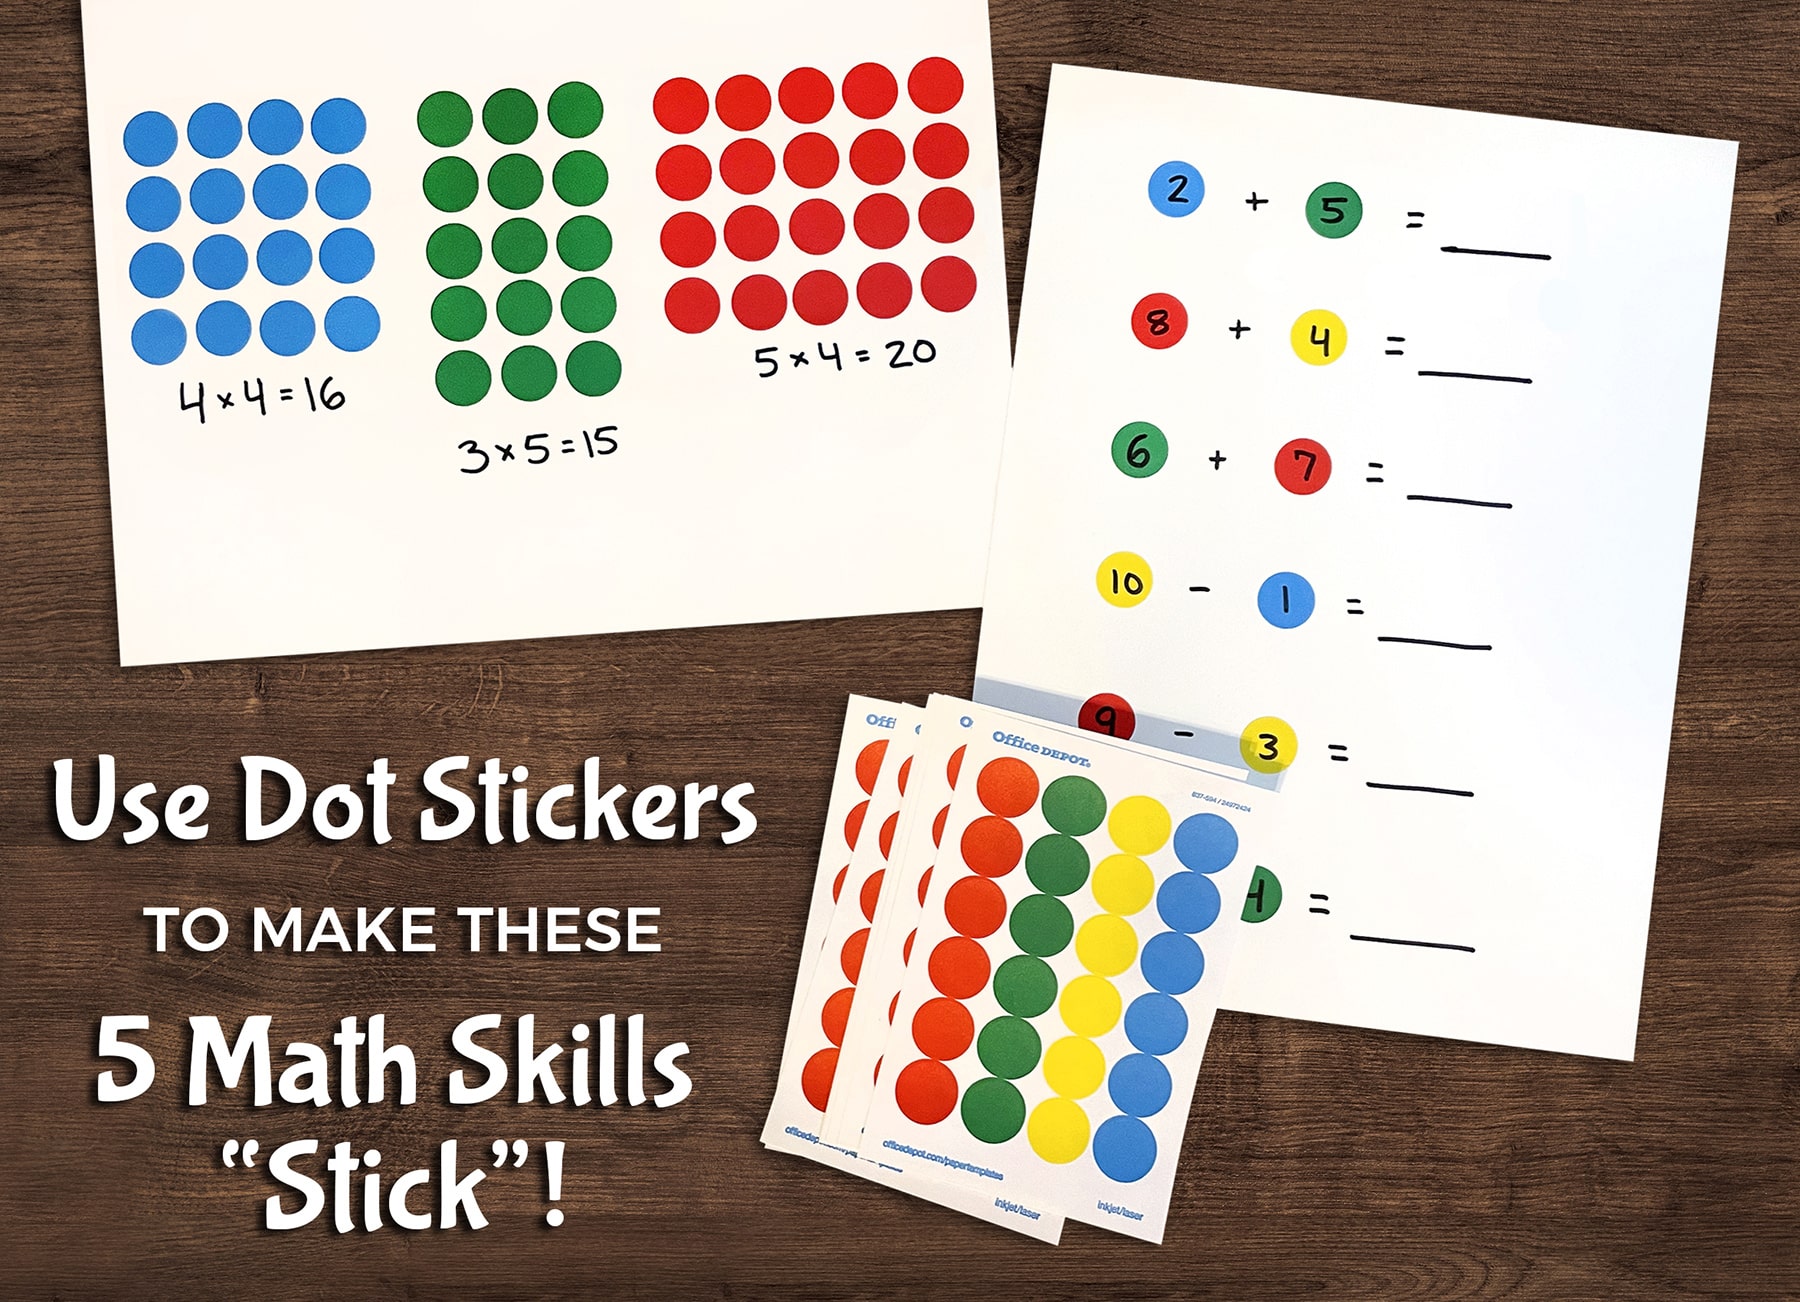 5 Math Skills You Can Teach with Dot Stickers 